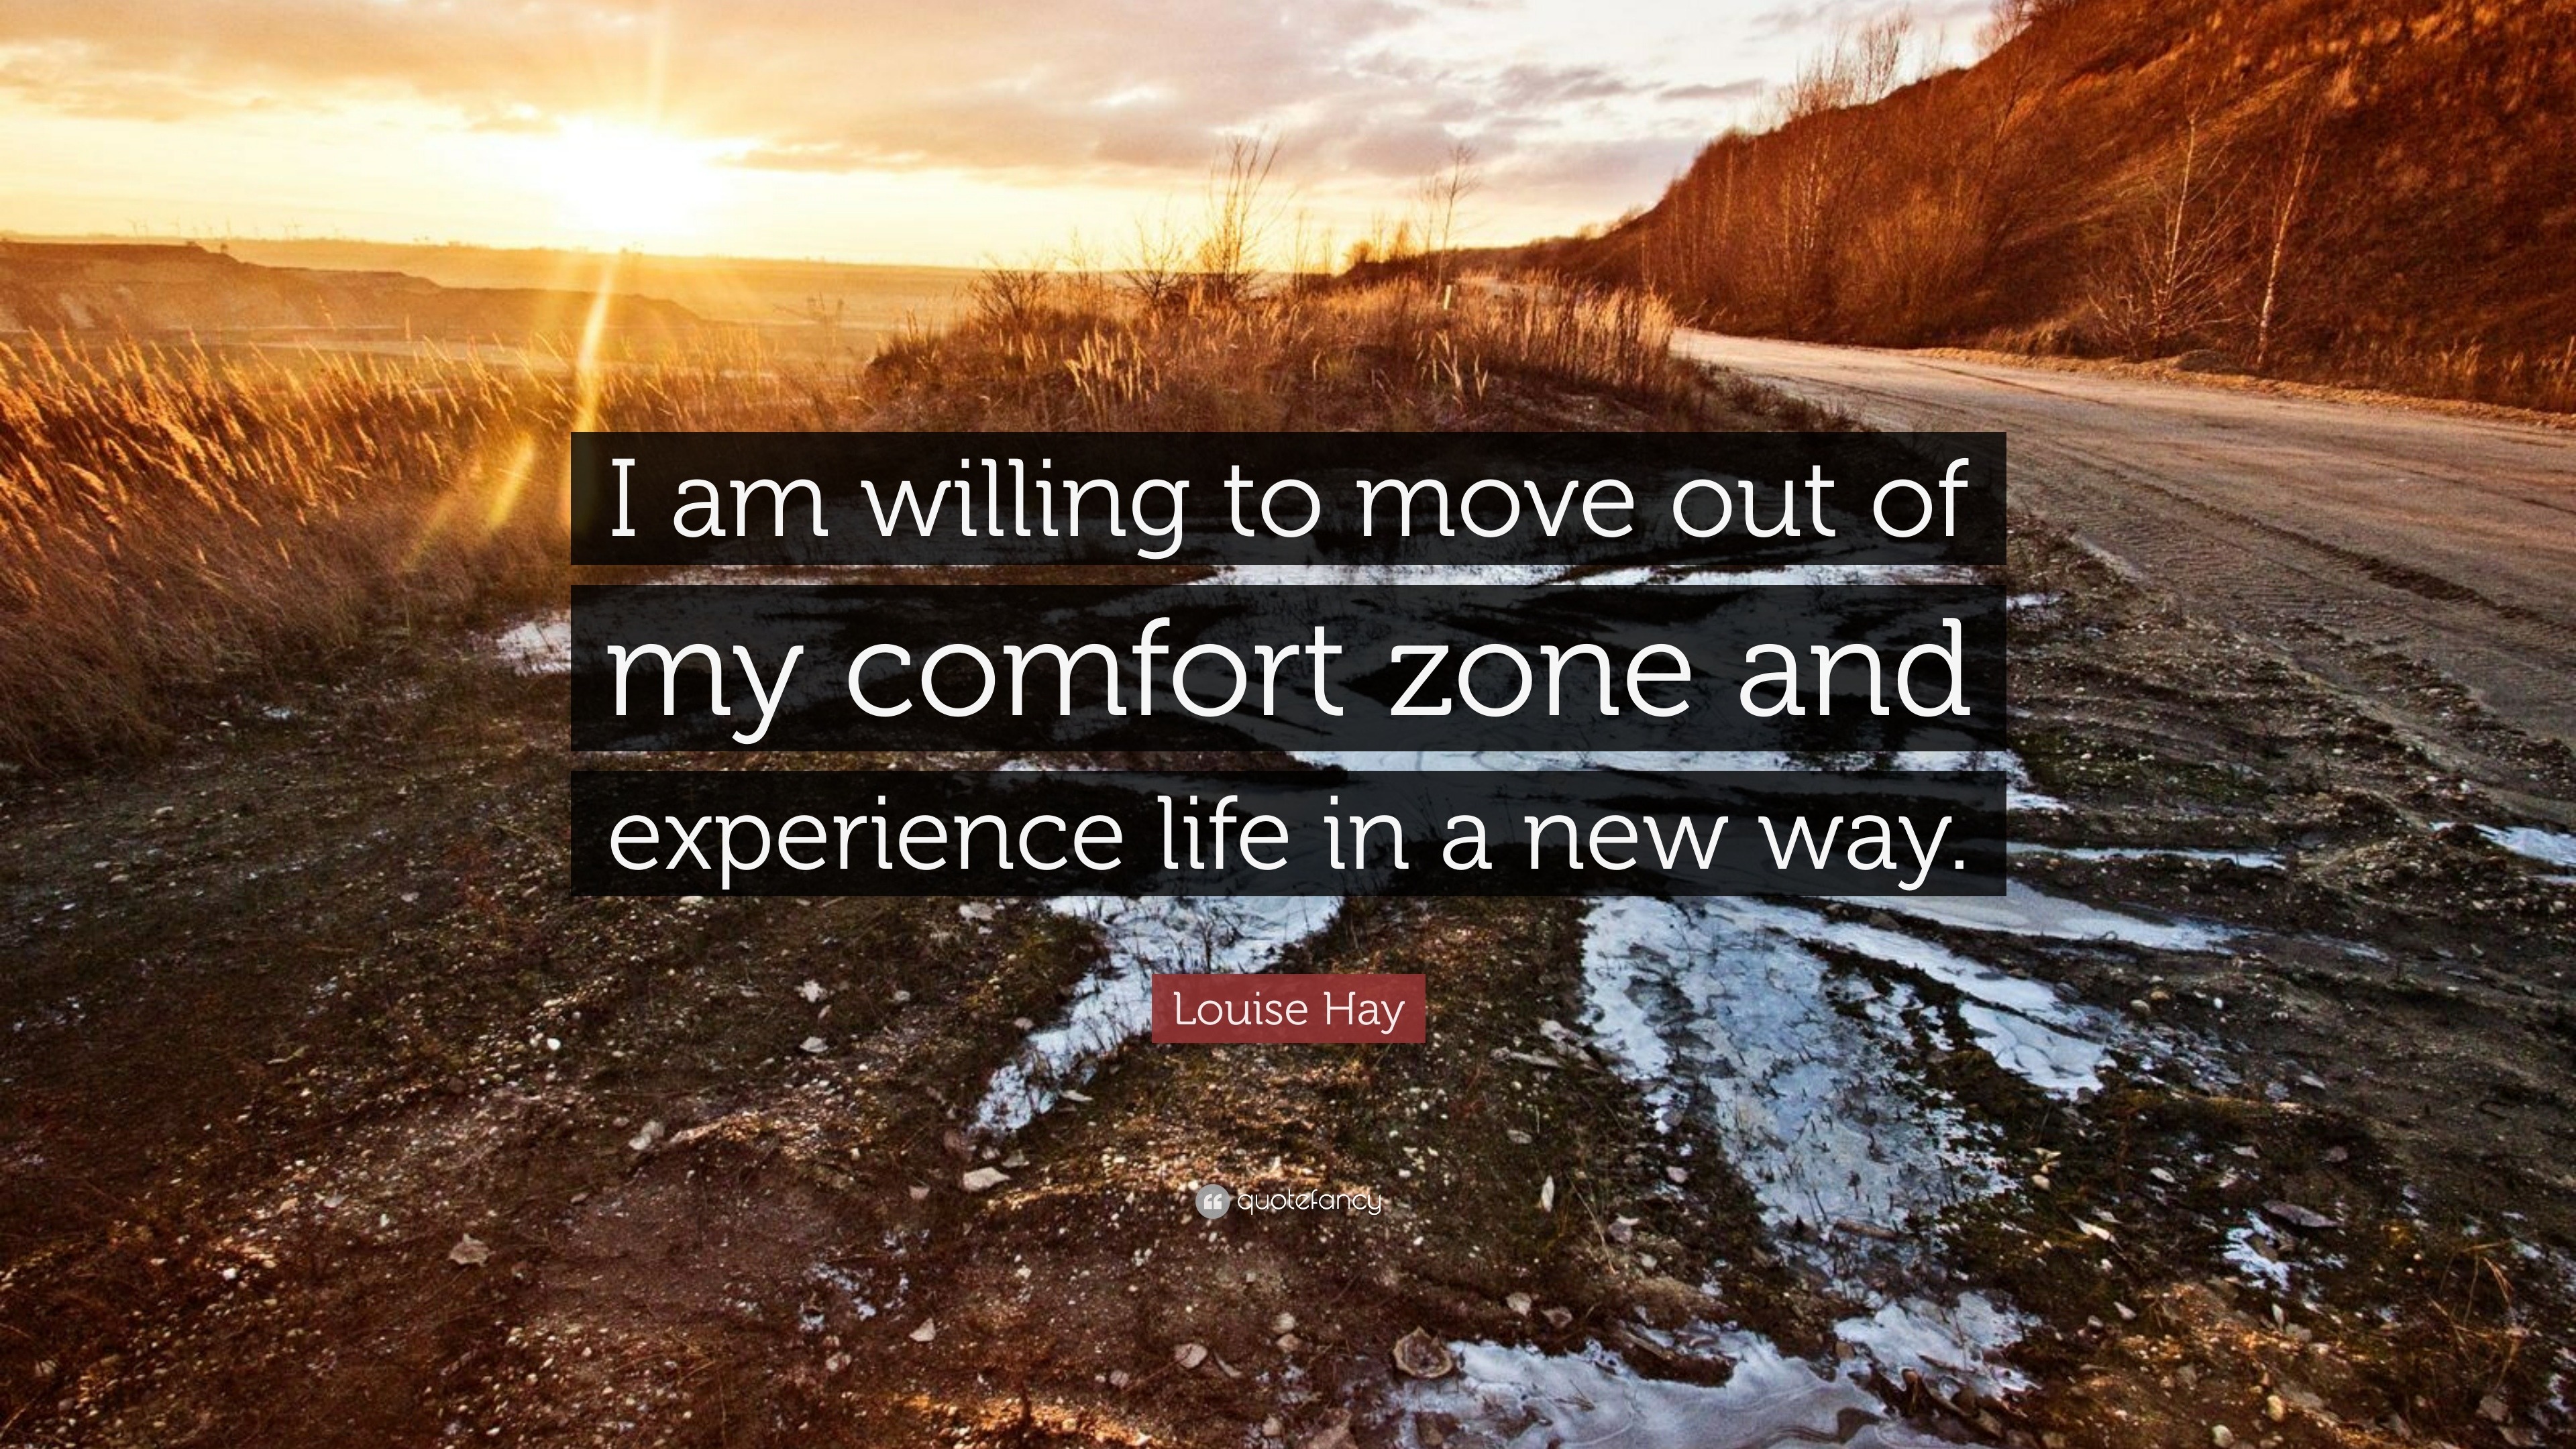 Your Comfort Zone Is This Way - ALIVE Outdoors